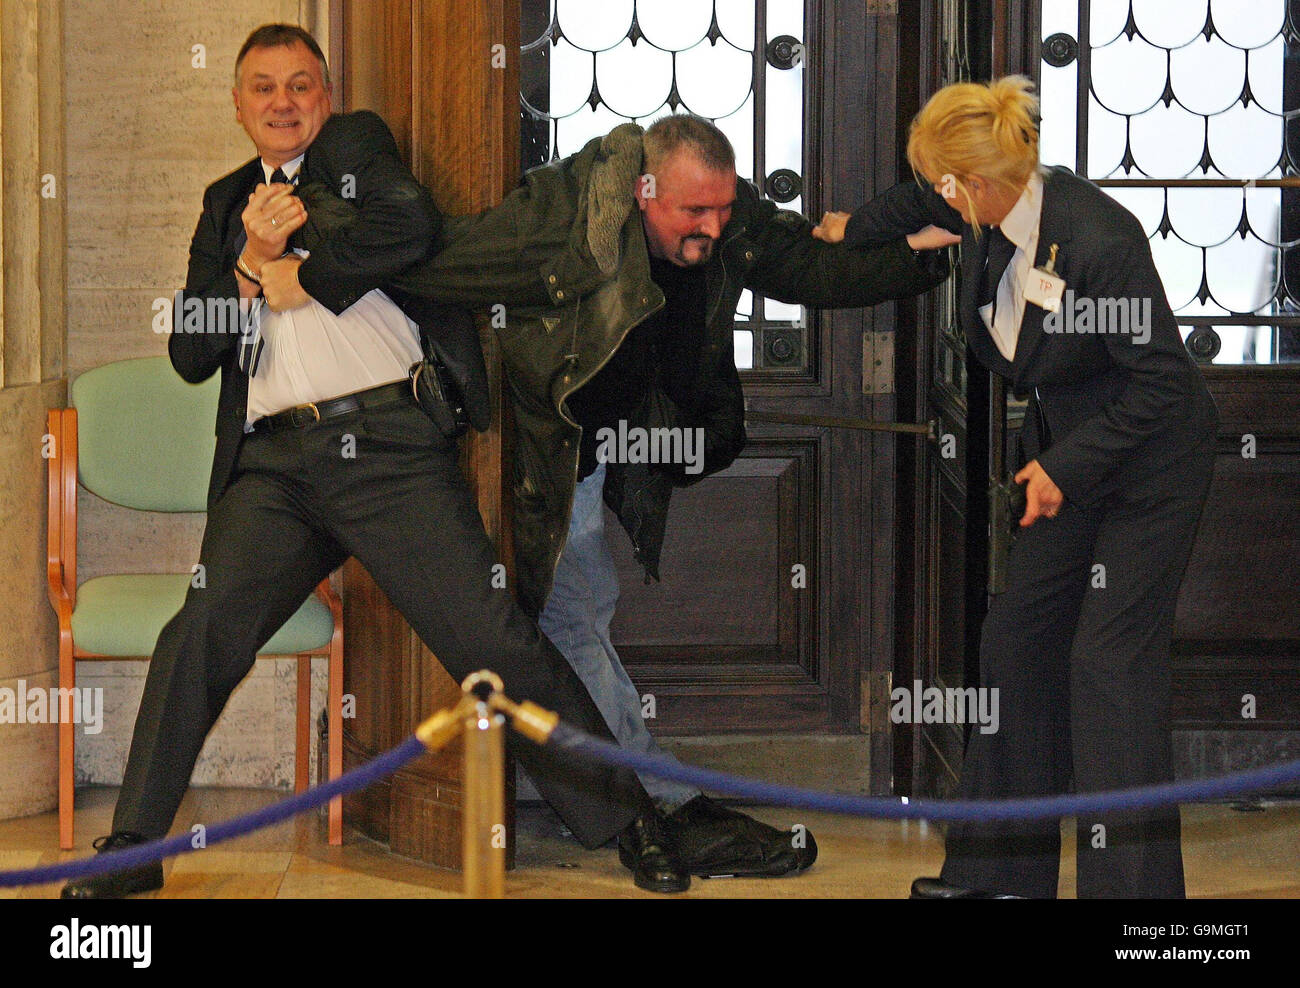 https://c8.alamy.com/comp/G9MGT1/michael-stone-being-restrained-be-security-staff-after-forcing-the-G9MGT1.jpg